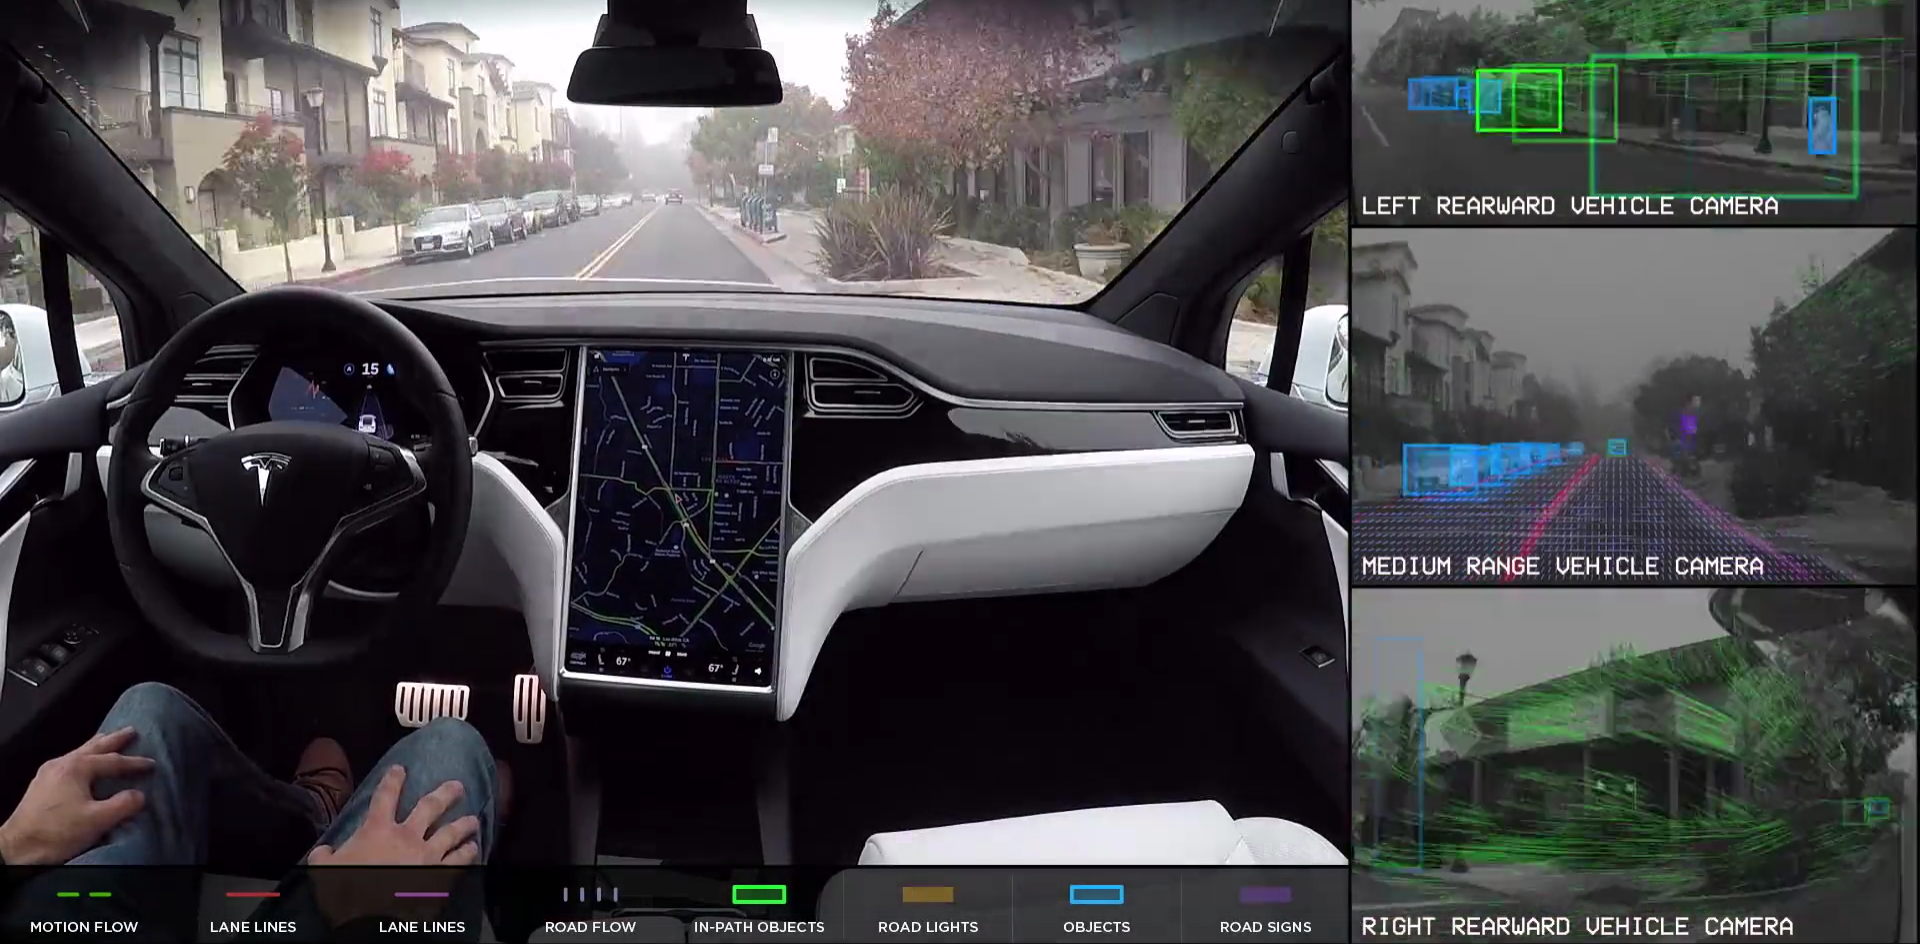 Tesla to transition from 'Enhanced Autopilot' to 'Fully SelfDriving